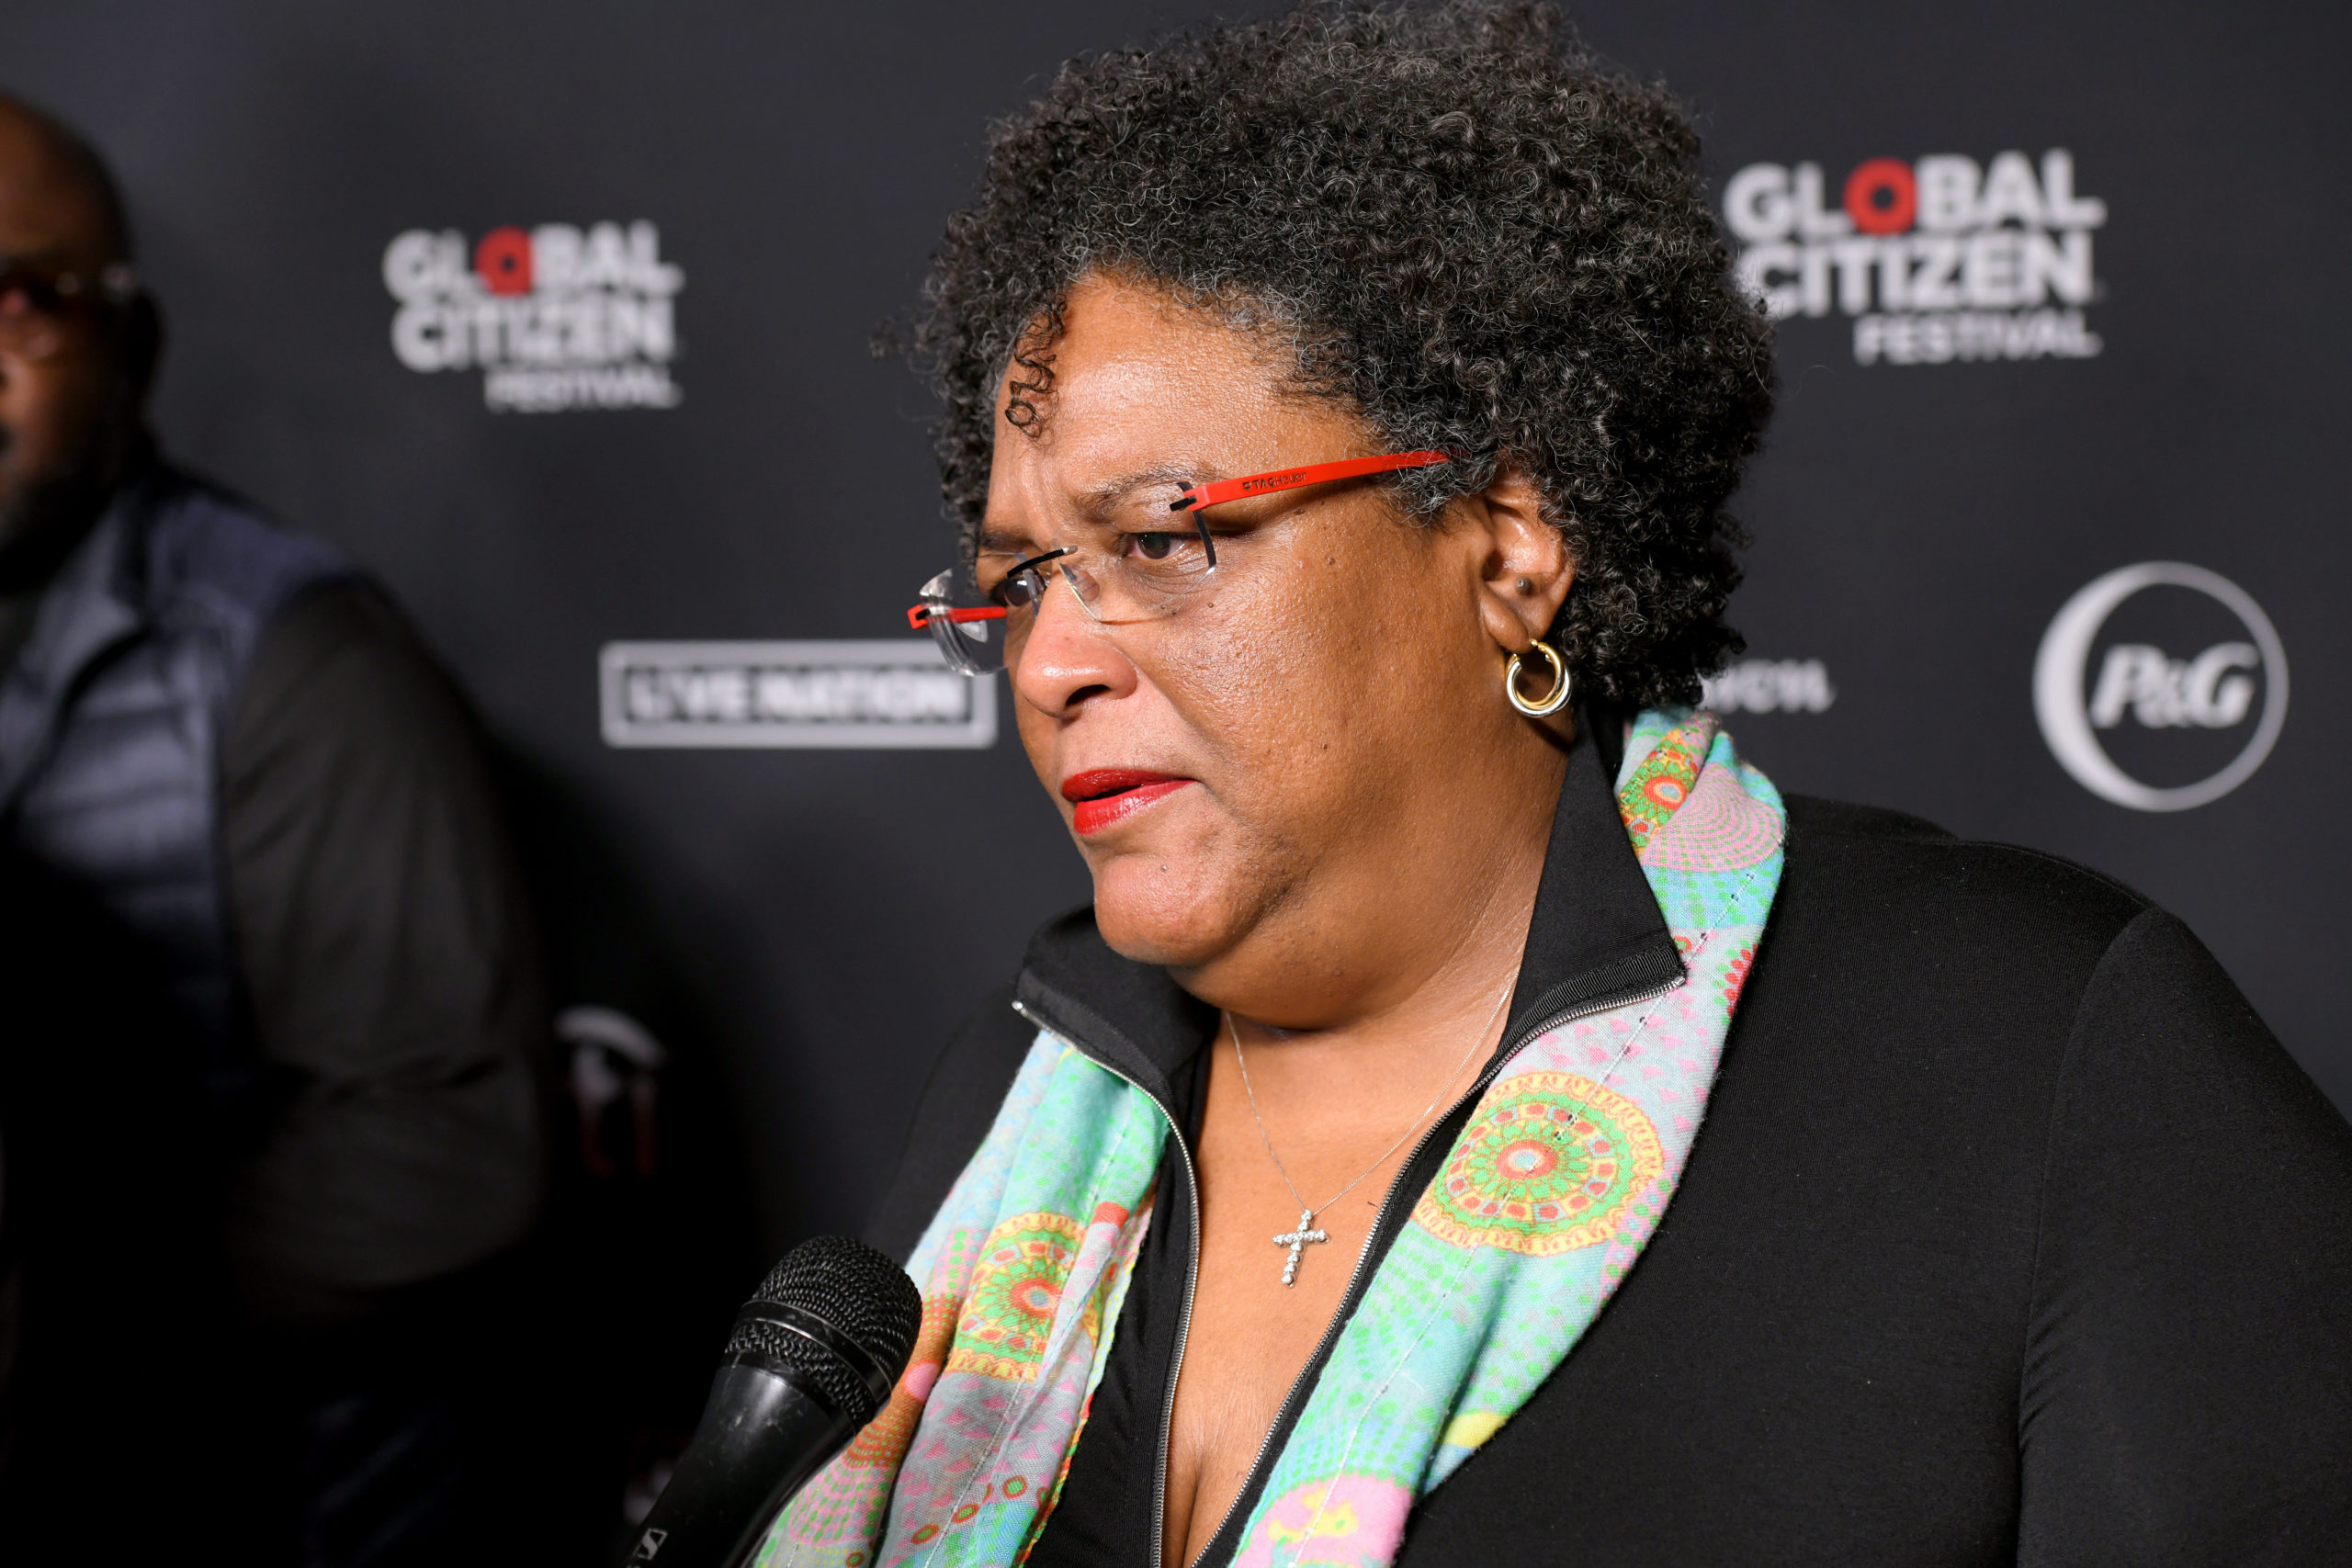 Barbados PM Mia Mottley asked if people should be allowed to be gay